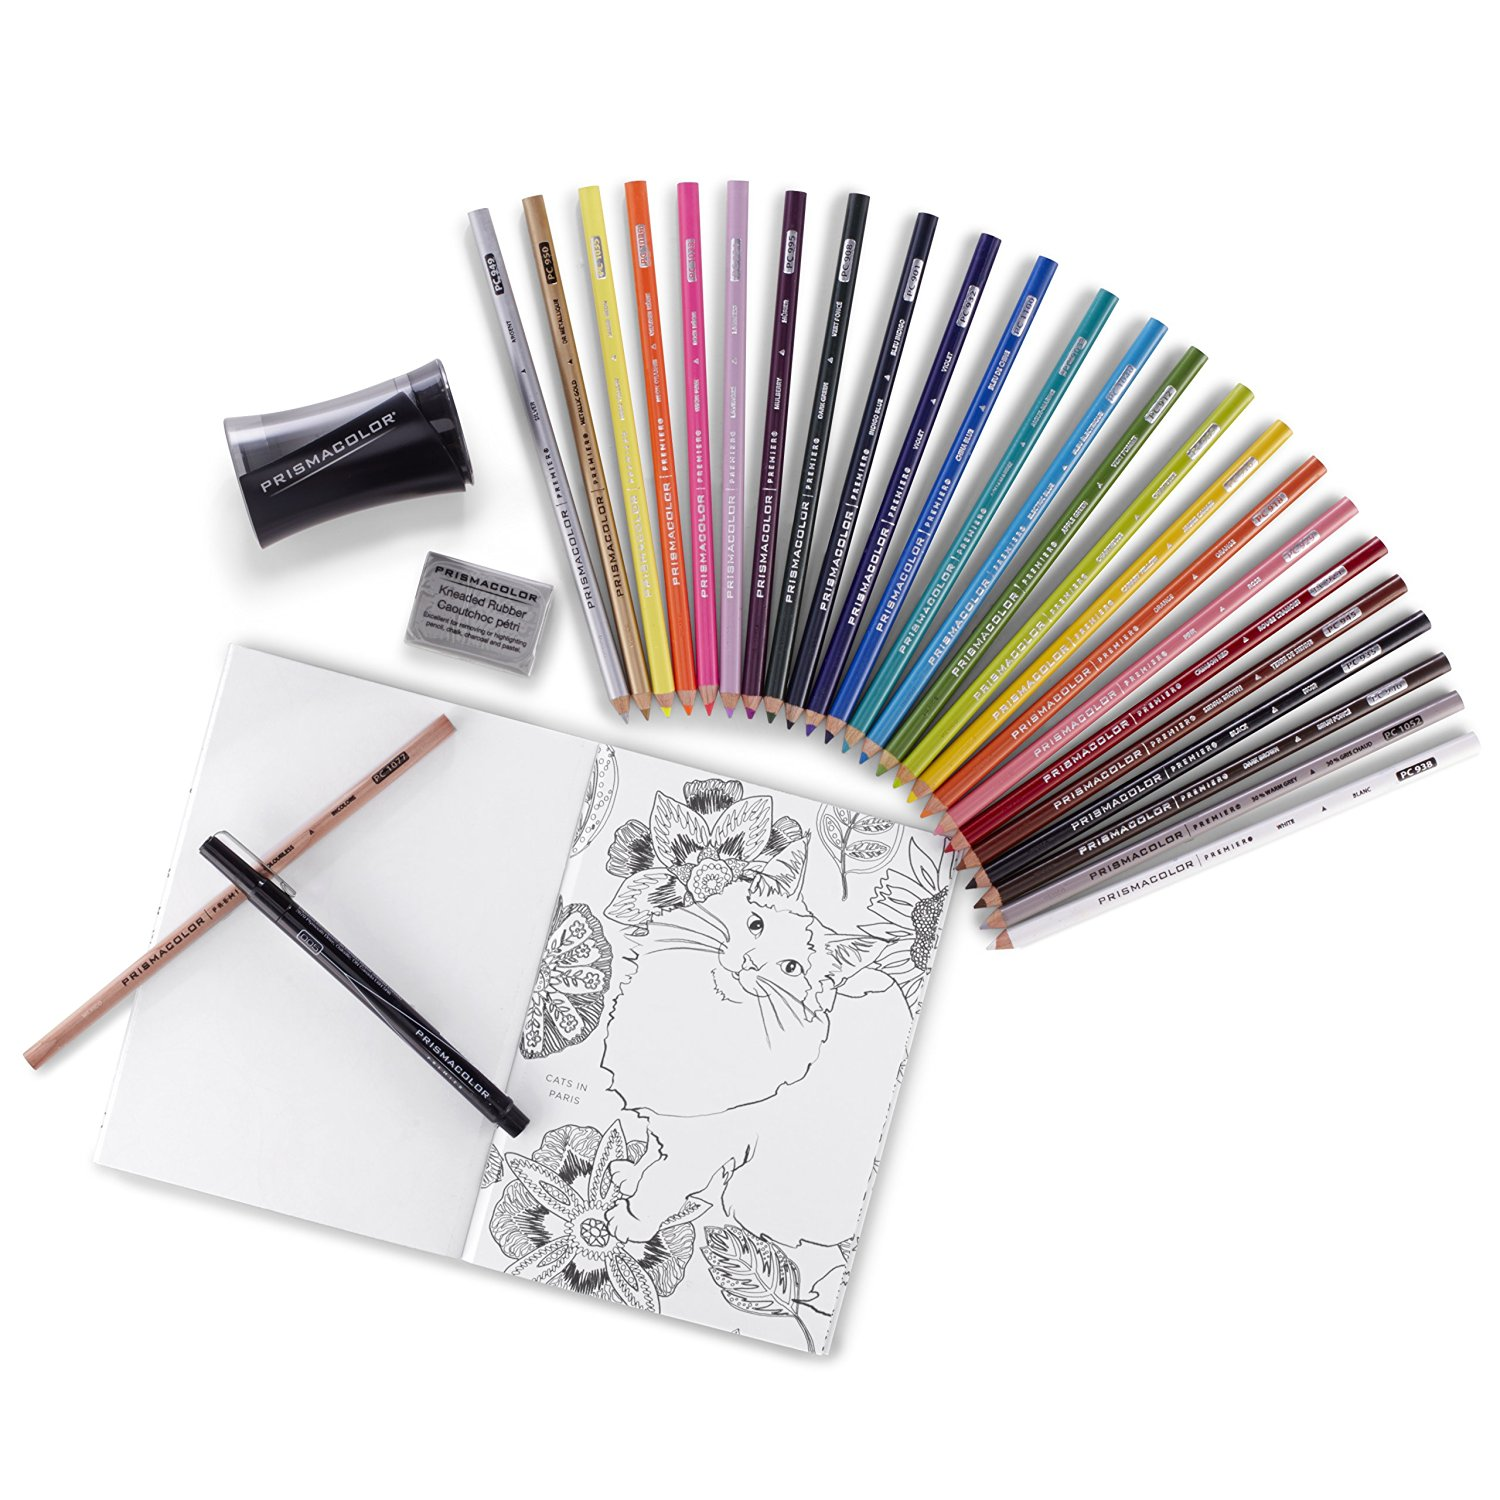 Prismacolor Premier Pencils Adult Coloring Kit Only $17.29! (Reg $34.99) Highly Rated!